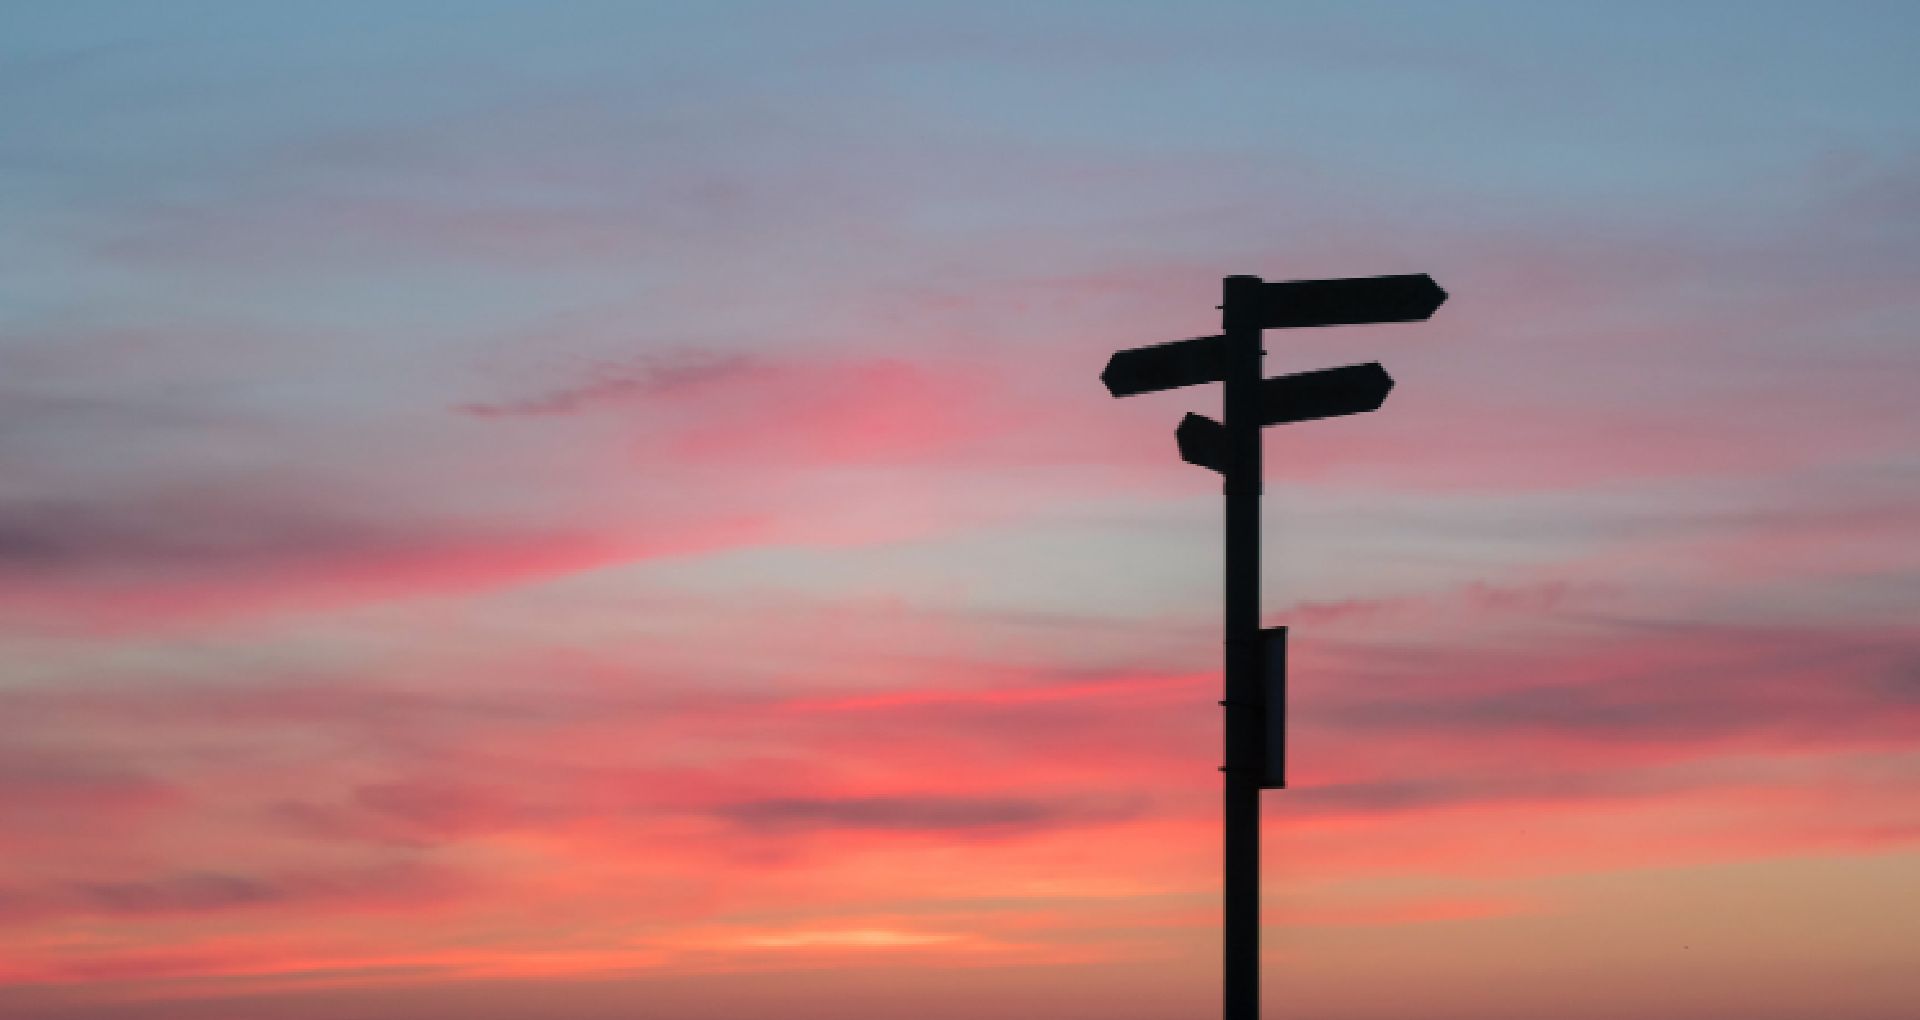 Sign post in the shadow with arrows pointing in different directions in front of a sunset sky.